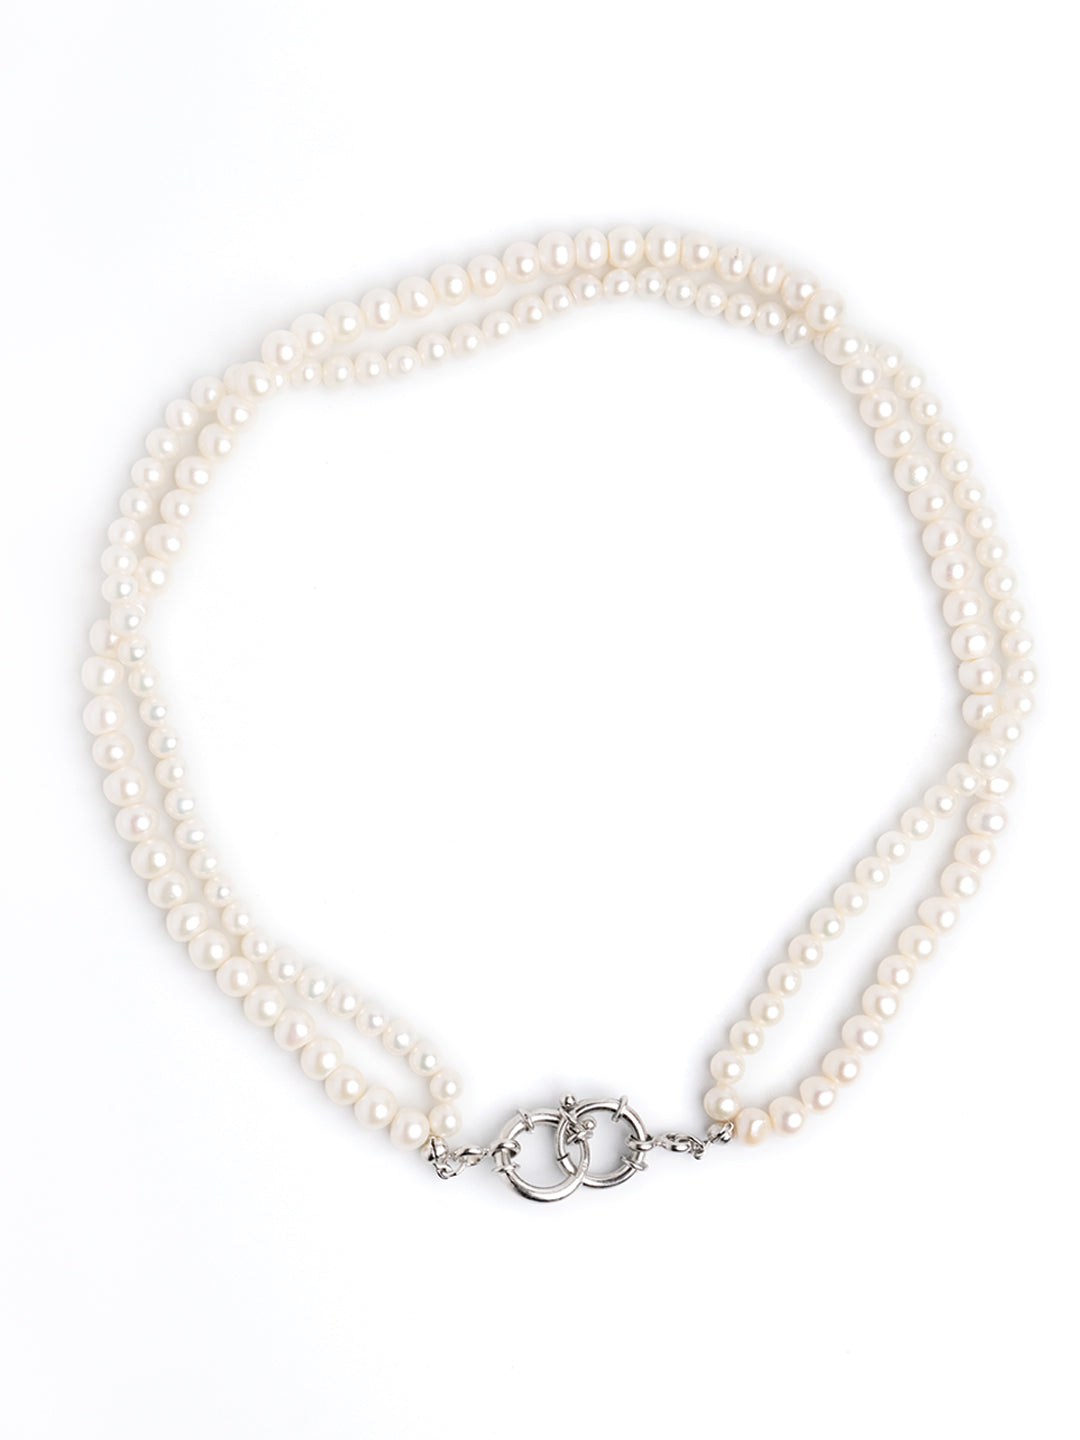 Double stand pearl choker